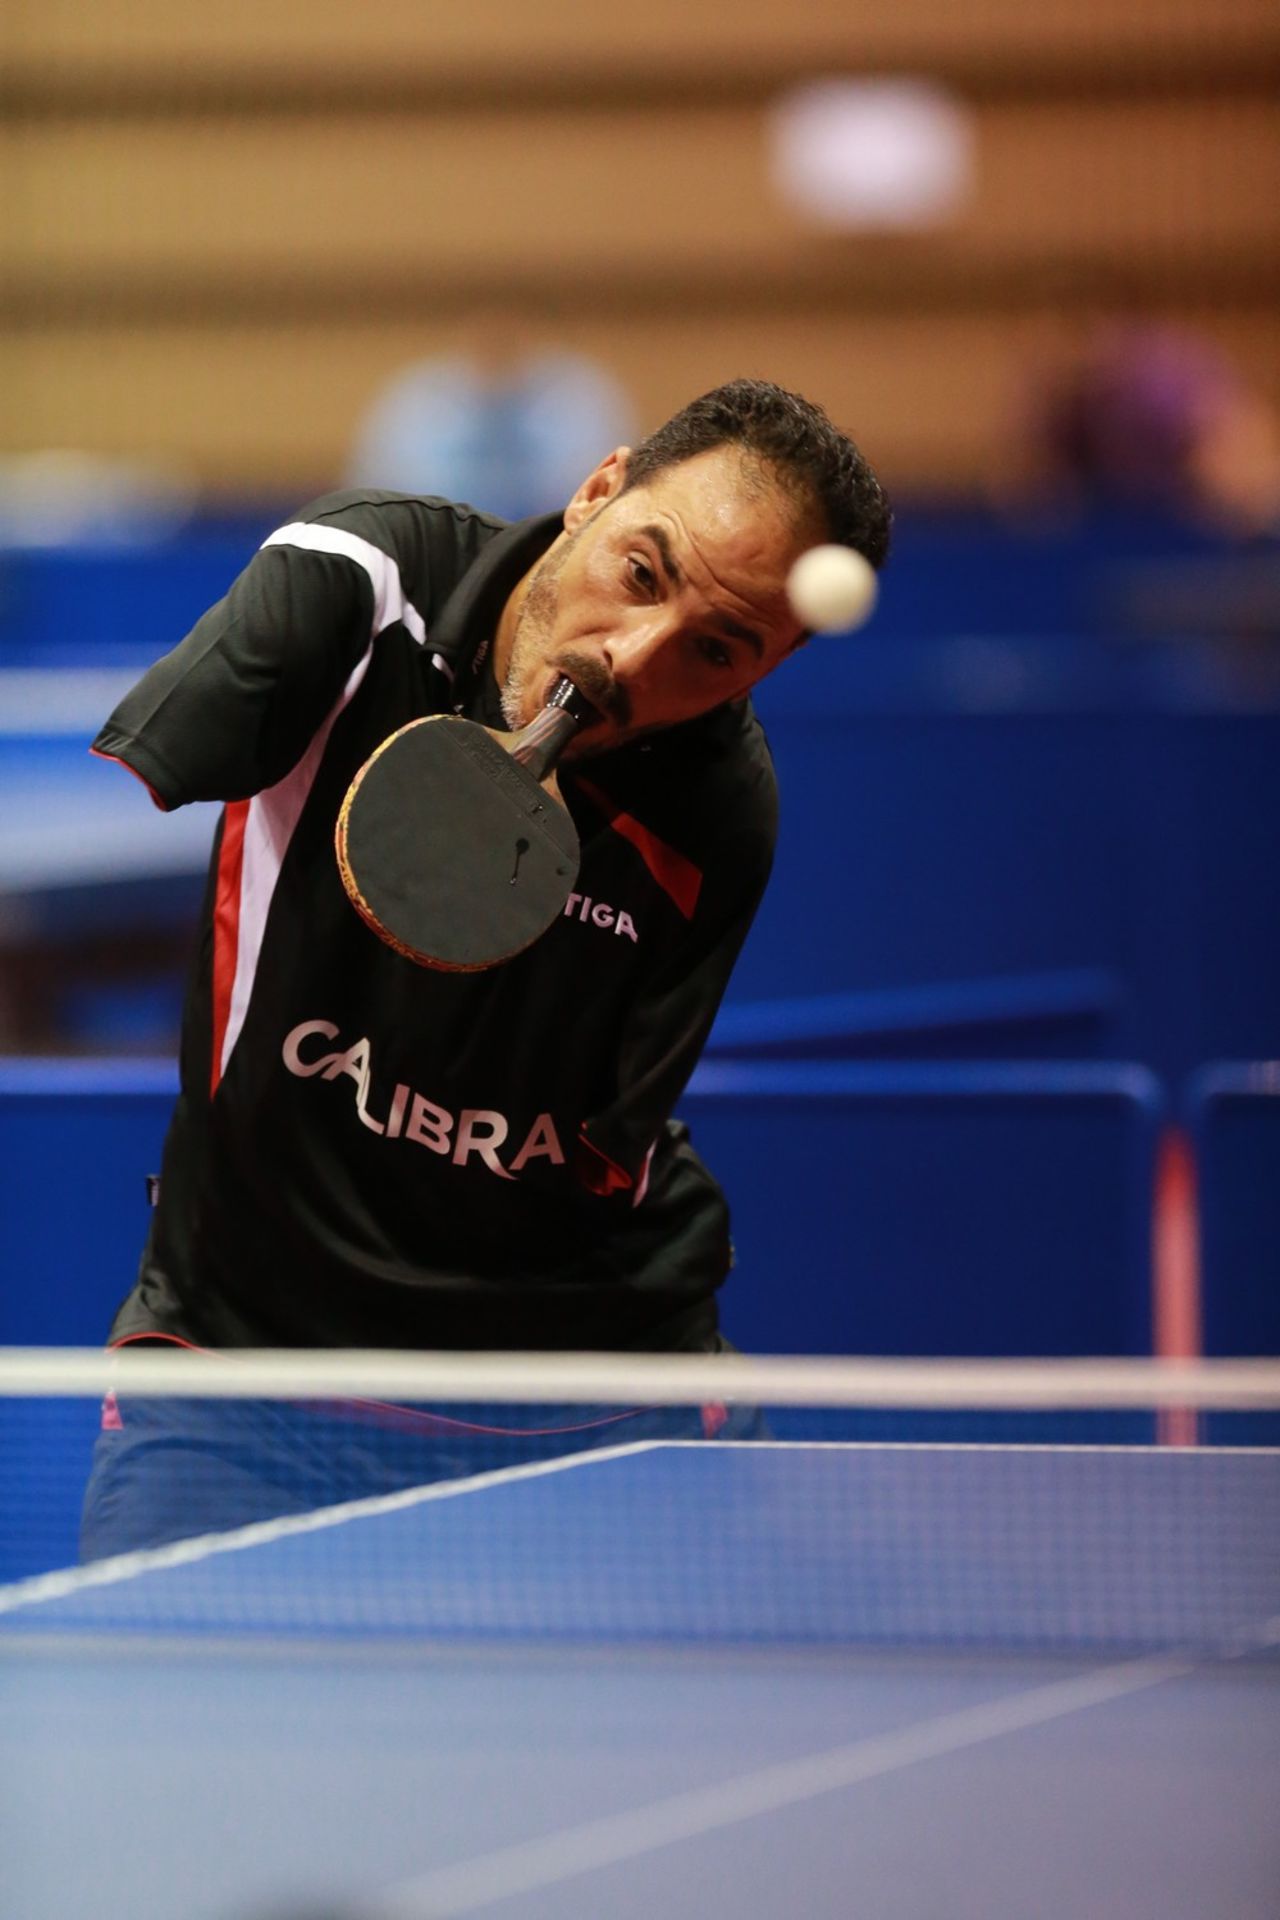 Ibrahim Hamadto is an Egyptian para-table tennis player and silver medalist in the 2013 African Para-Table Tennis Championships.